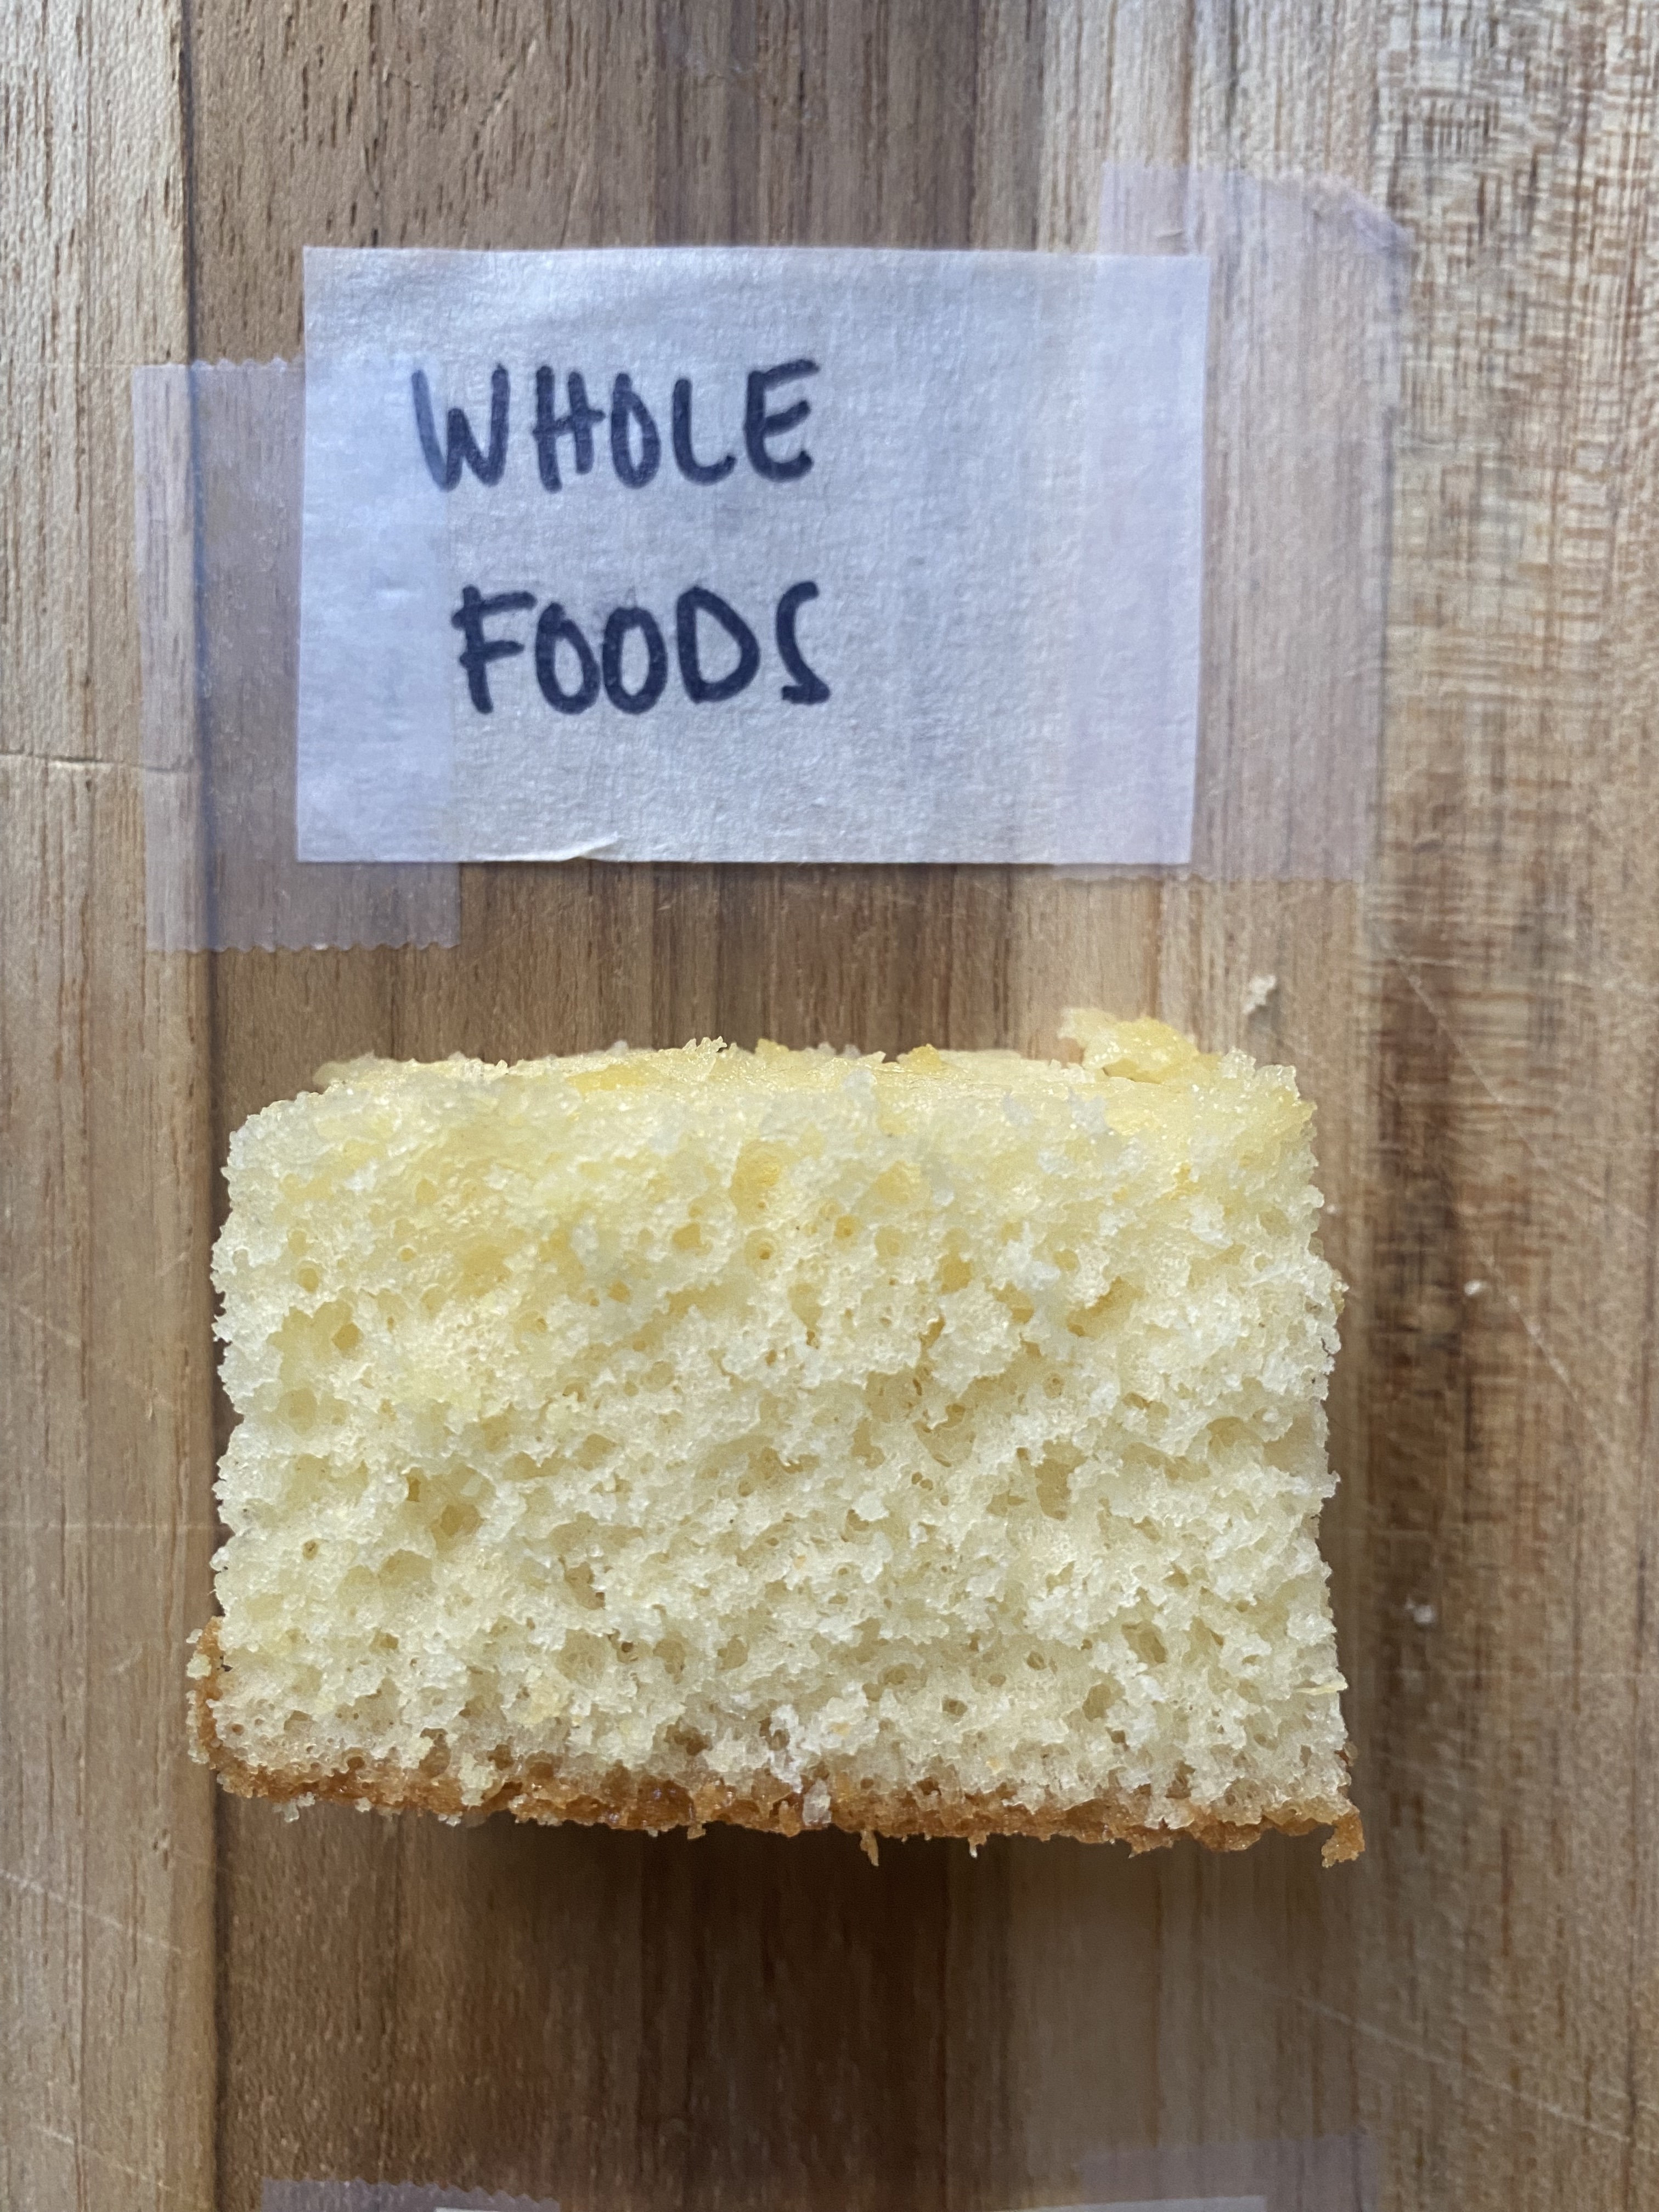 a piece of whole foods cake on a cutting board with tape labeling it